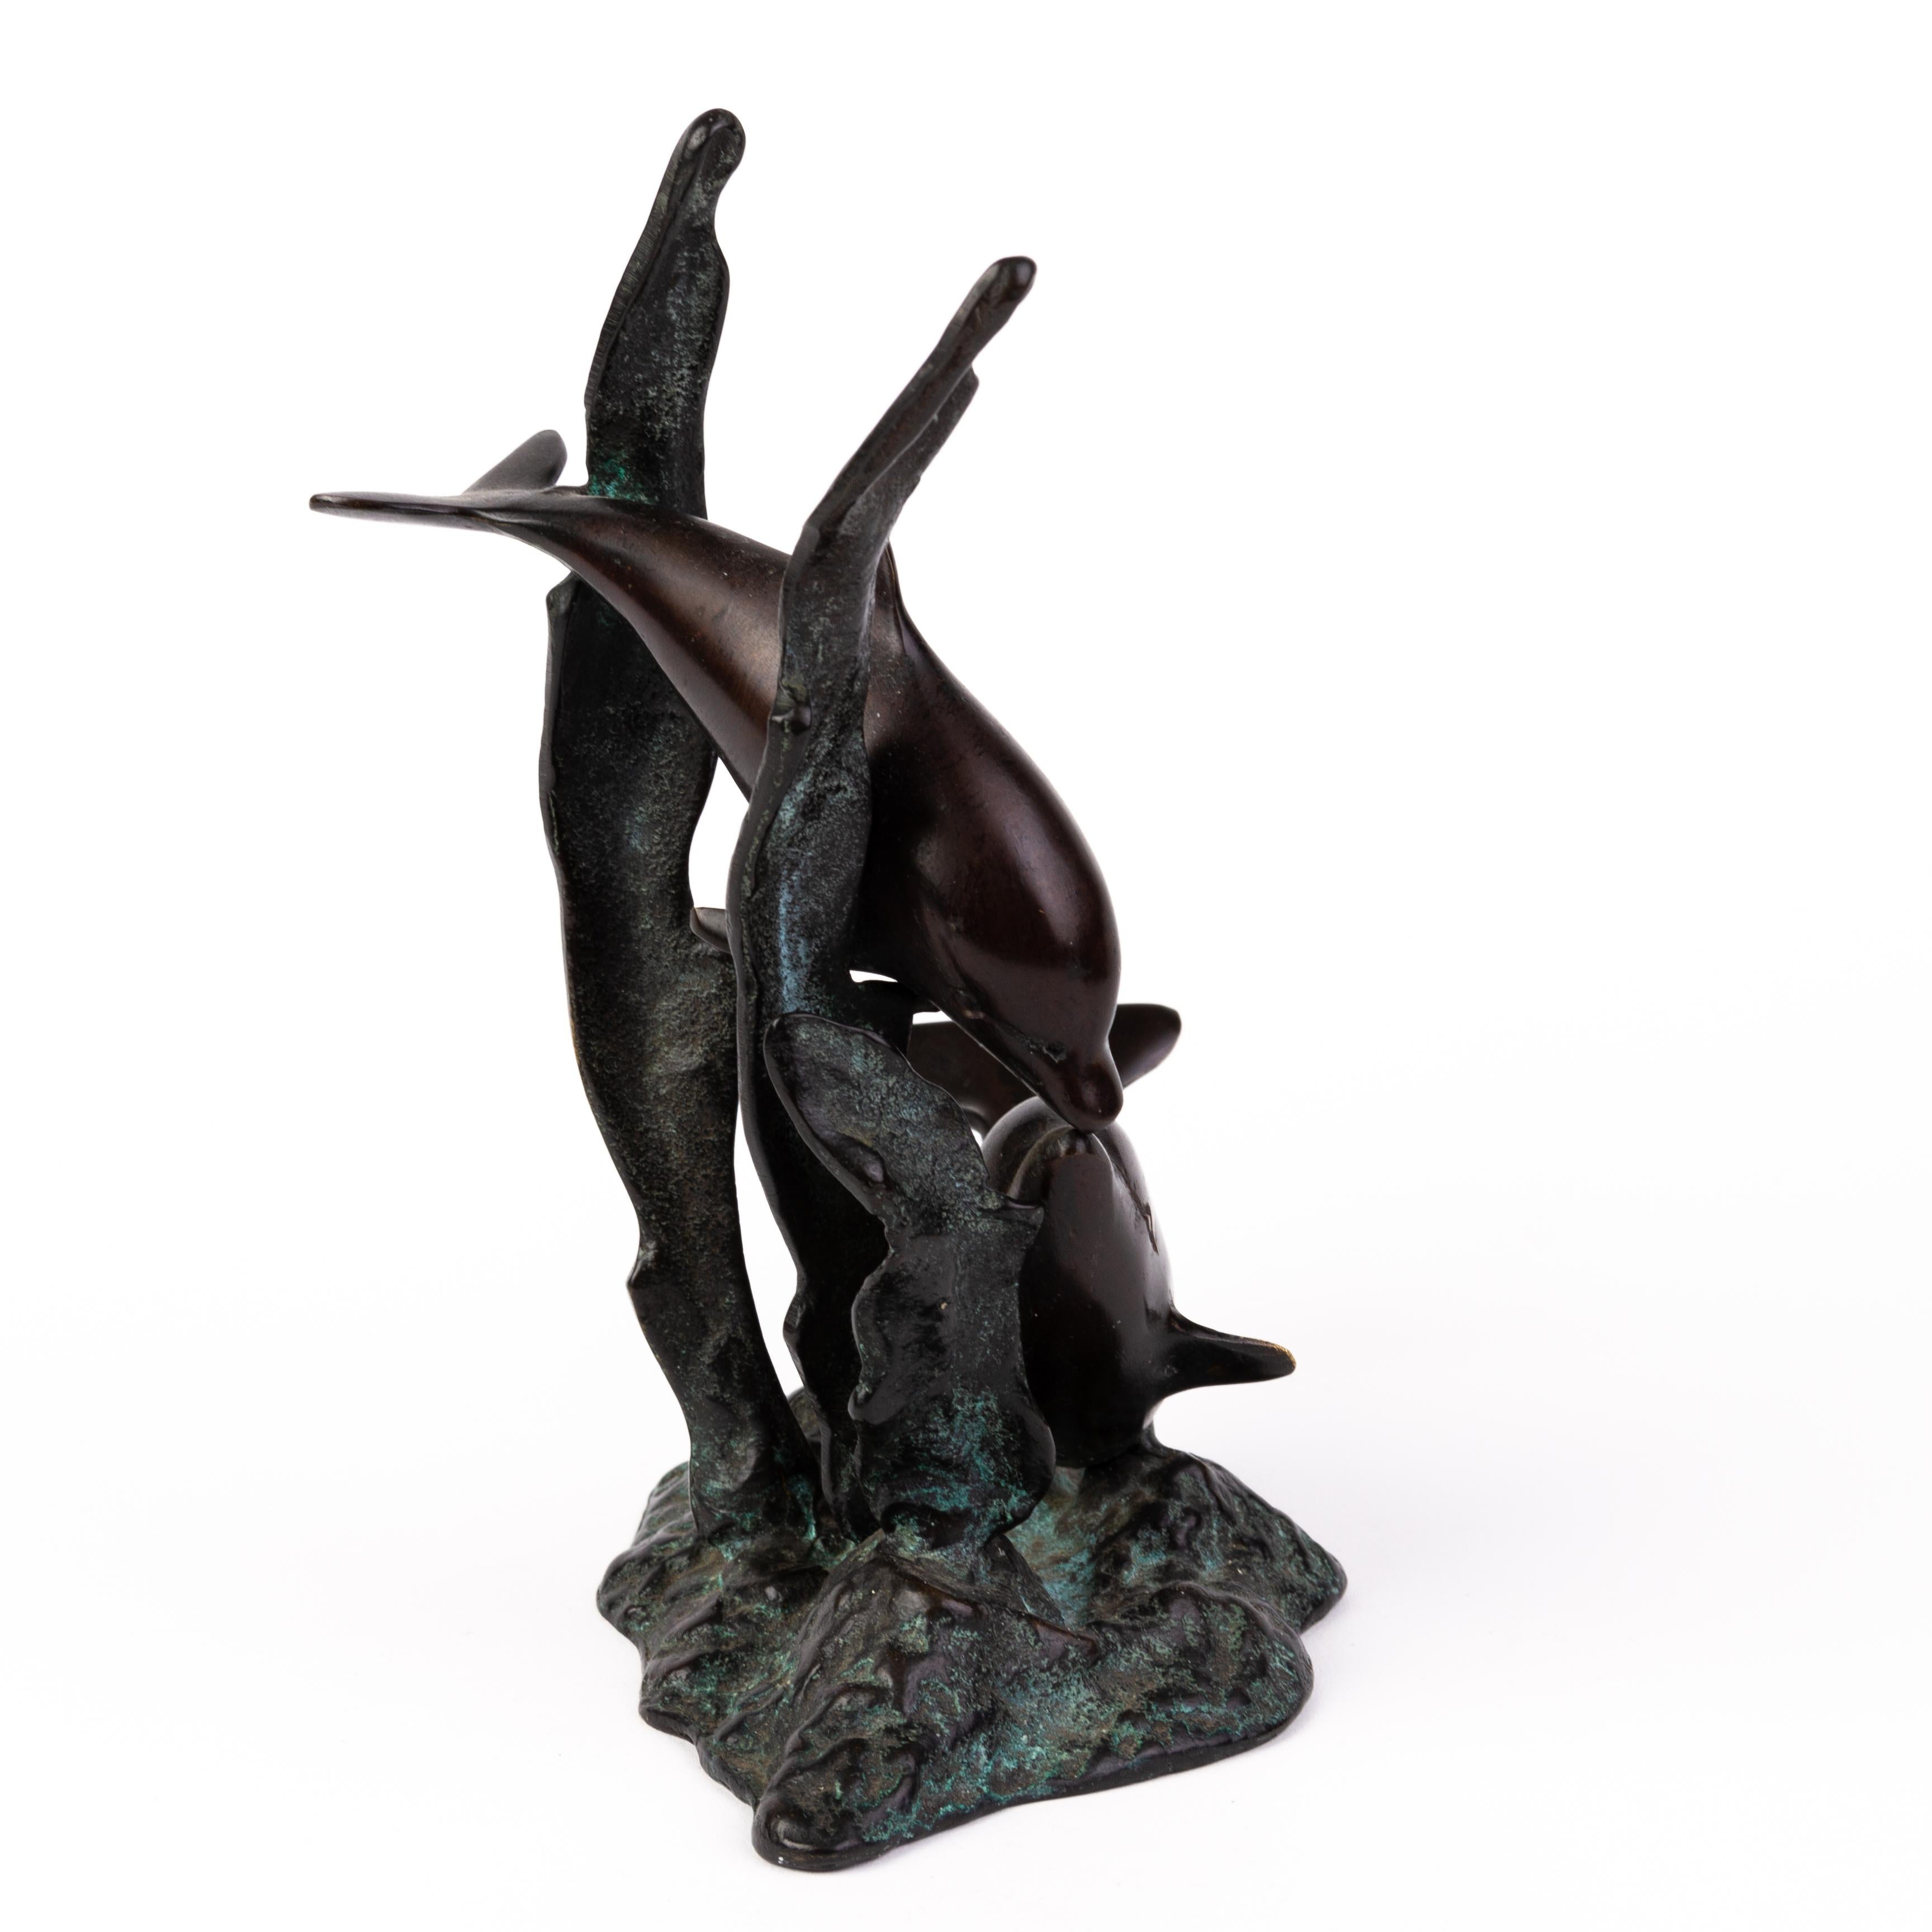 In good condition
From a private collection
Free international shipping
Bronze Dolphins Sculpture on Marble Base 